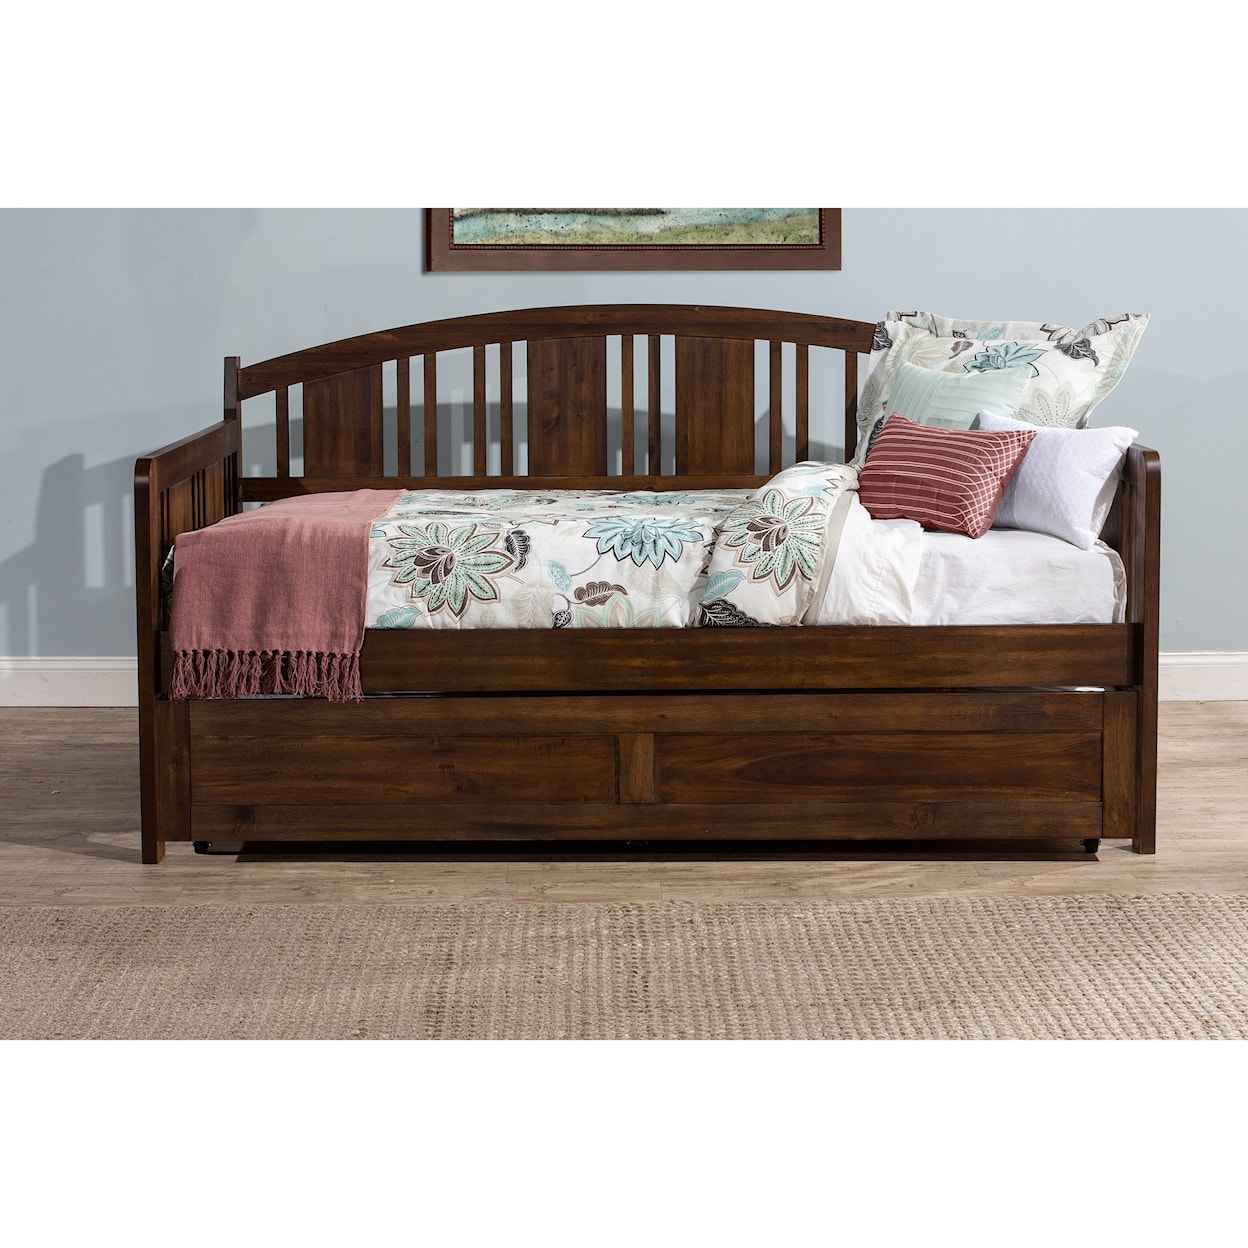 Hillsdale Dana Daybed with Trundle